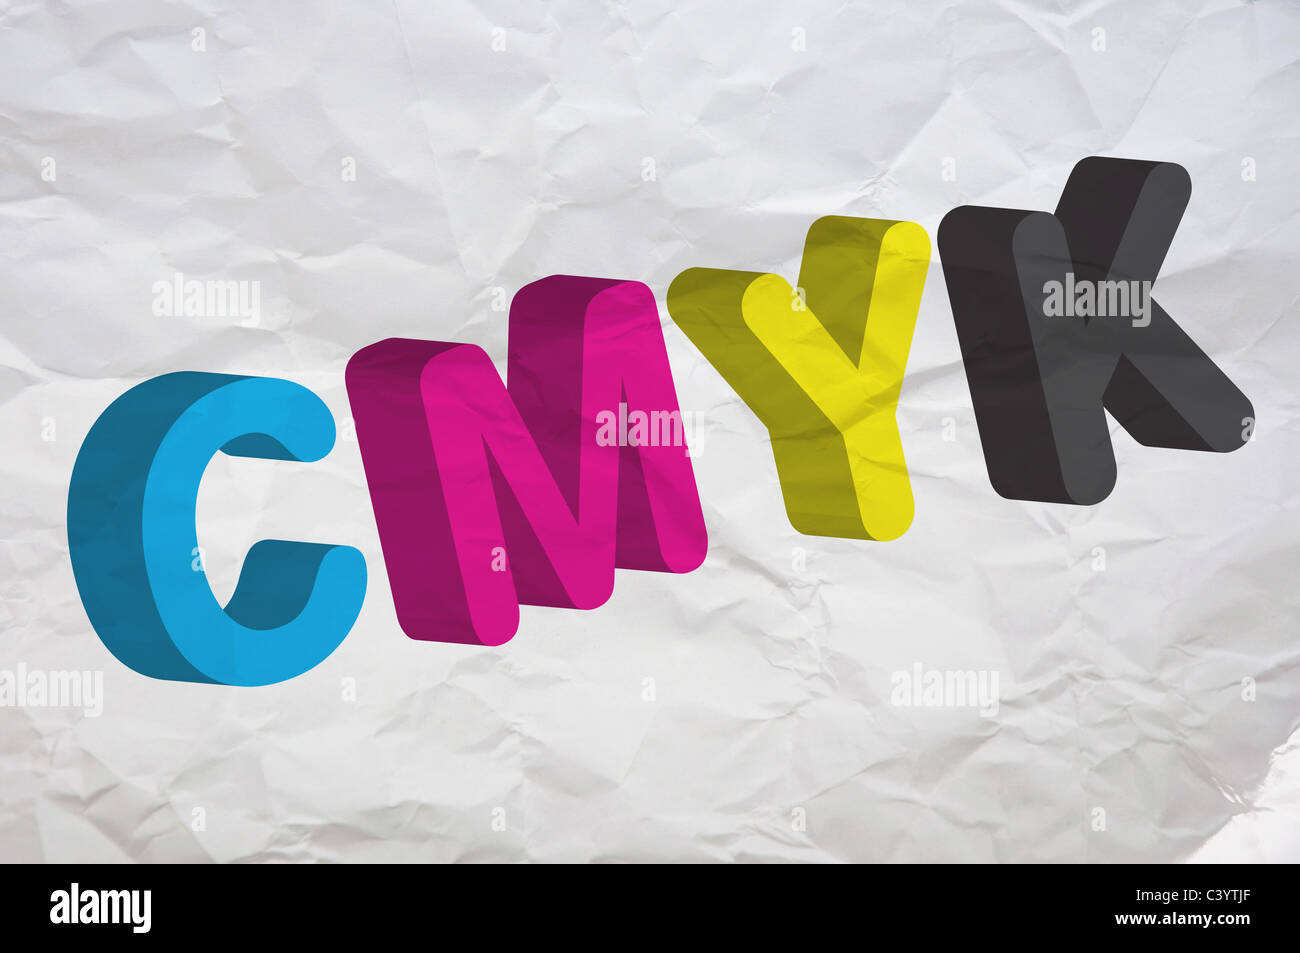 CMYK, four letters representing four colors in printing industry. Image can be used as a illustration for a polygraphic theme. Stock Photo